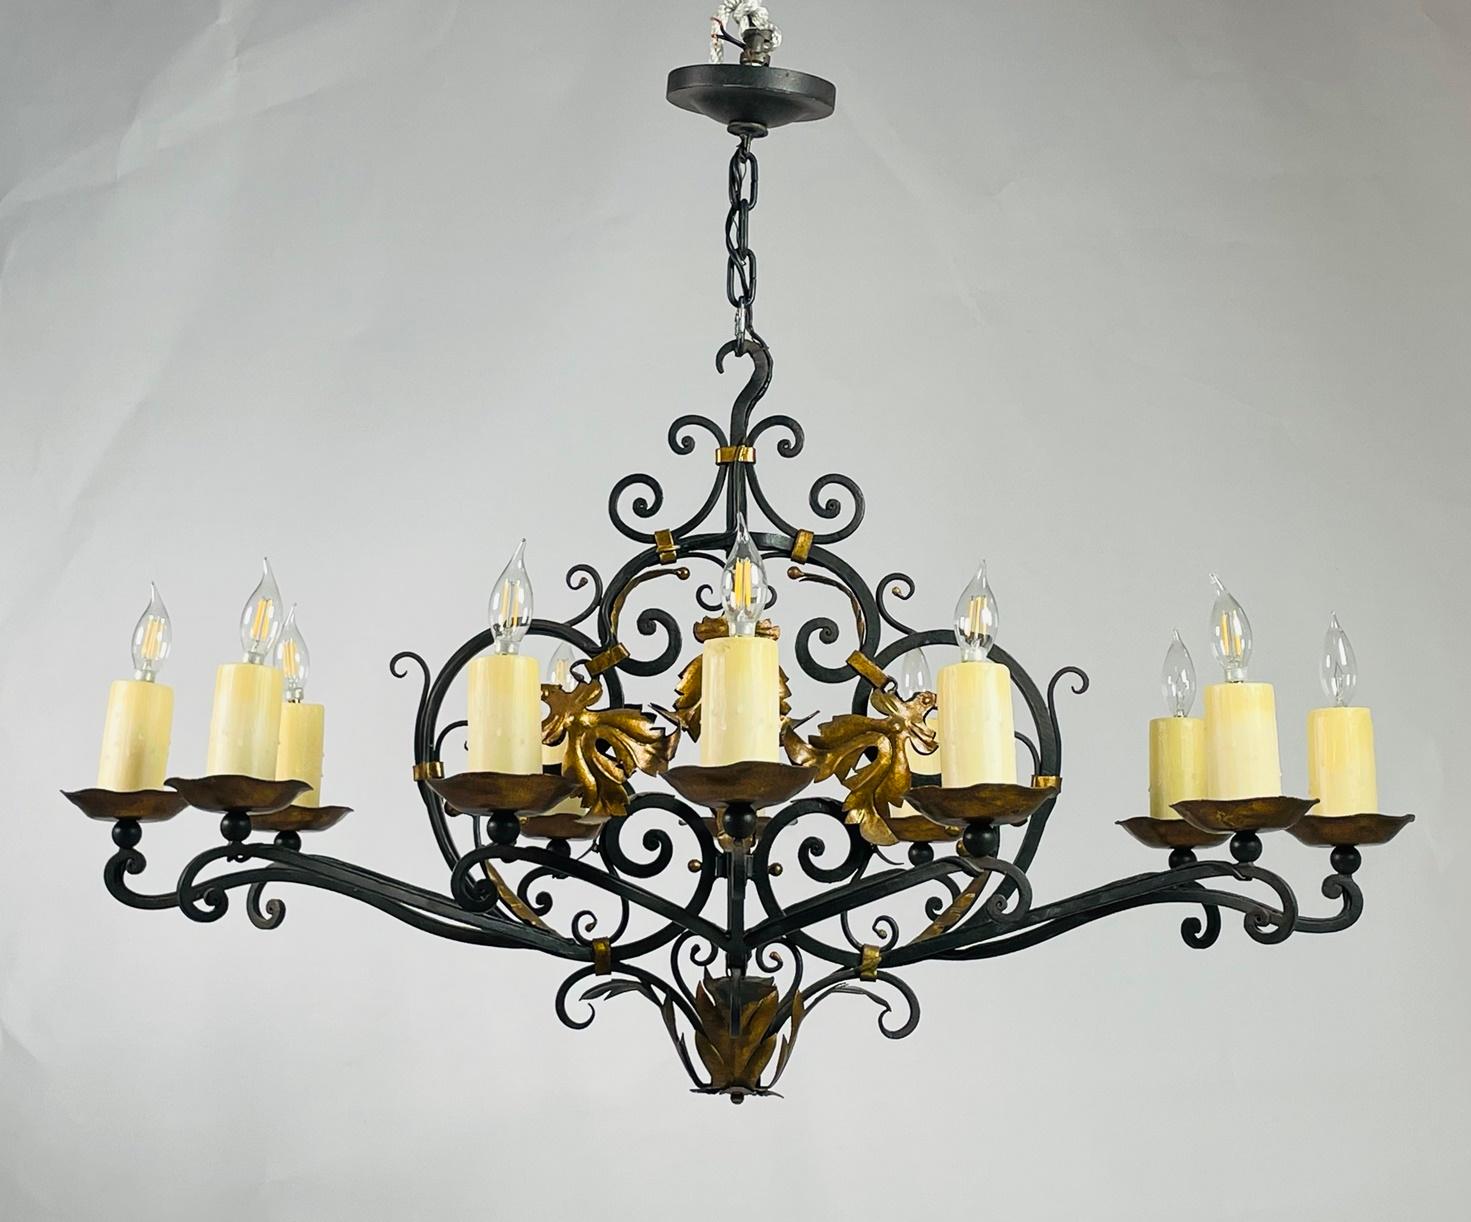 Introducing the exquisite Wrought Iron & Gold Gilt Chandelier by renowned artisan Paul Ferrante, crafted in the USA in 2016. This opulent masterpiece combines the timeless elegance of wrought iron with the luxurious allure of gold gilt, resulting in